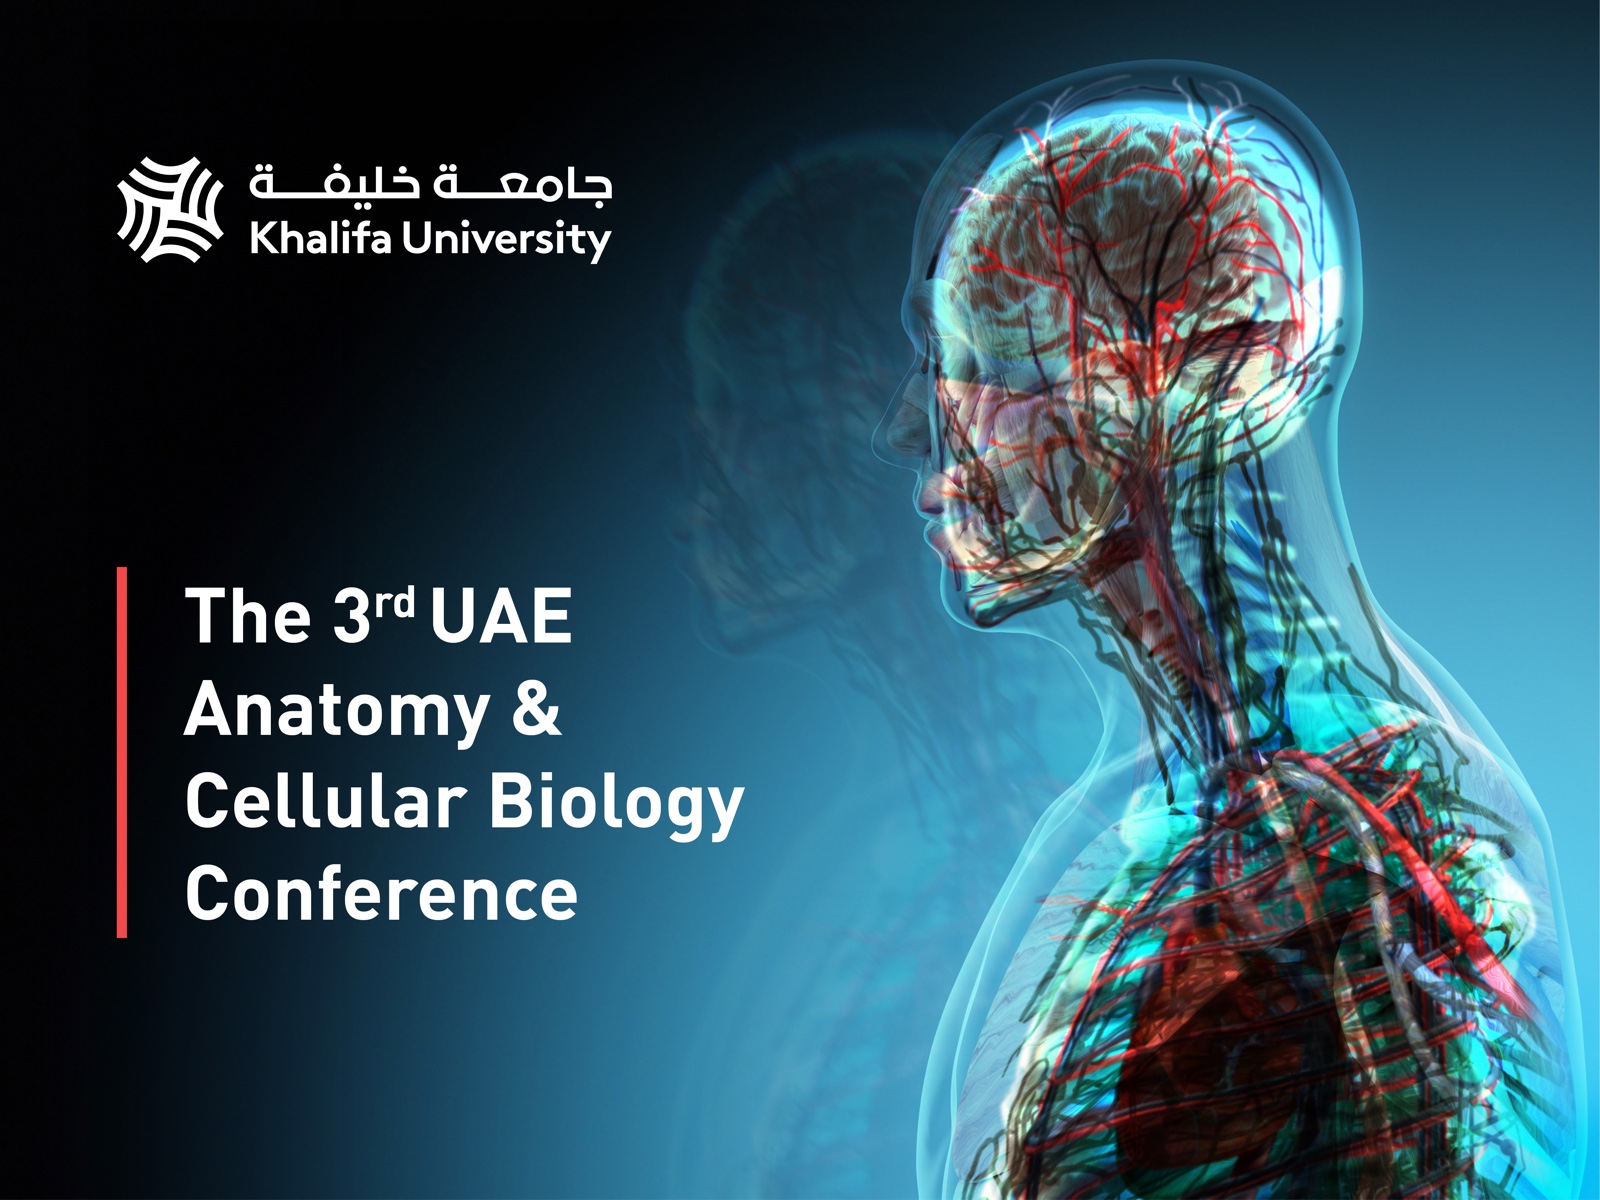 The 3rd UAE Anatomy and Cellular Biology Conference